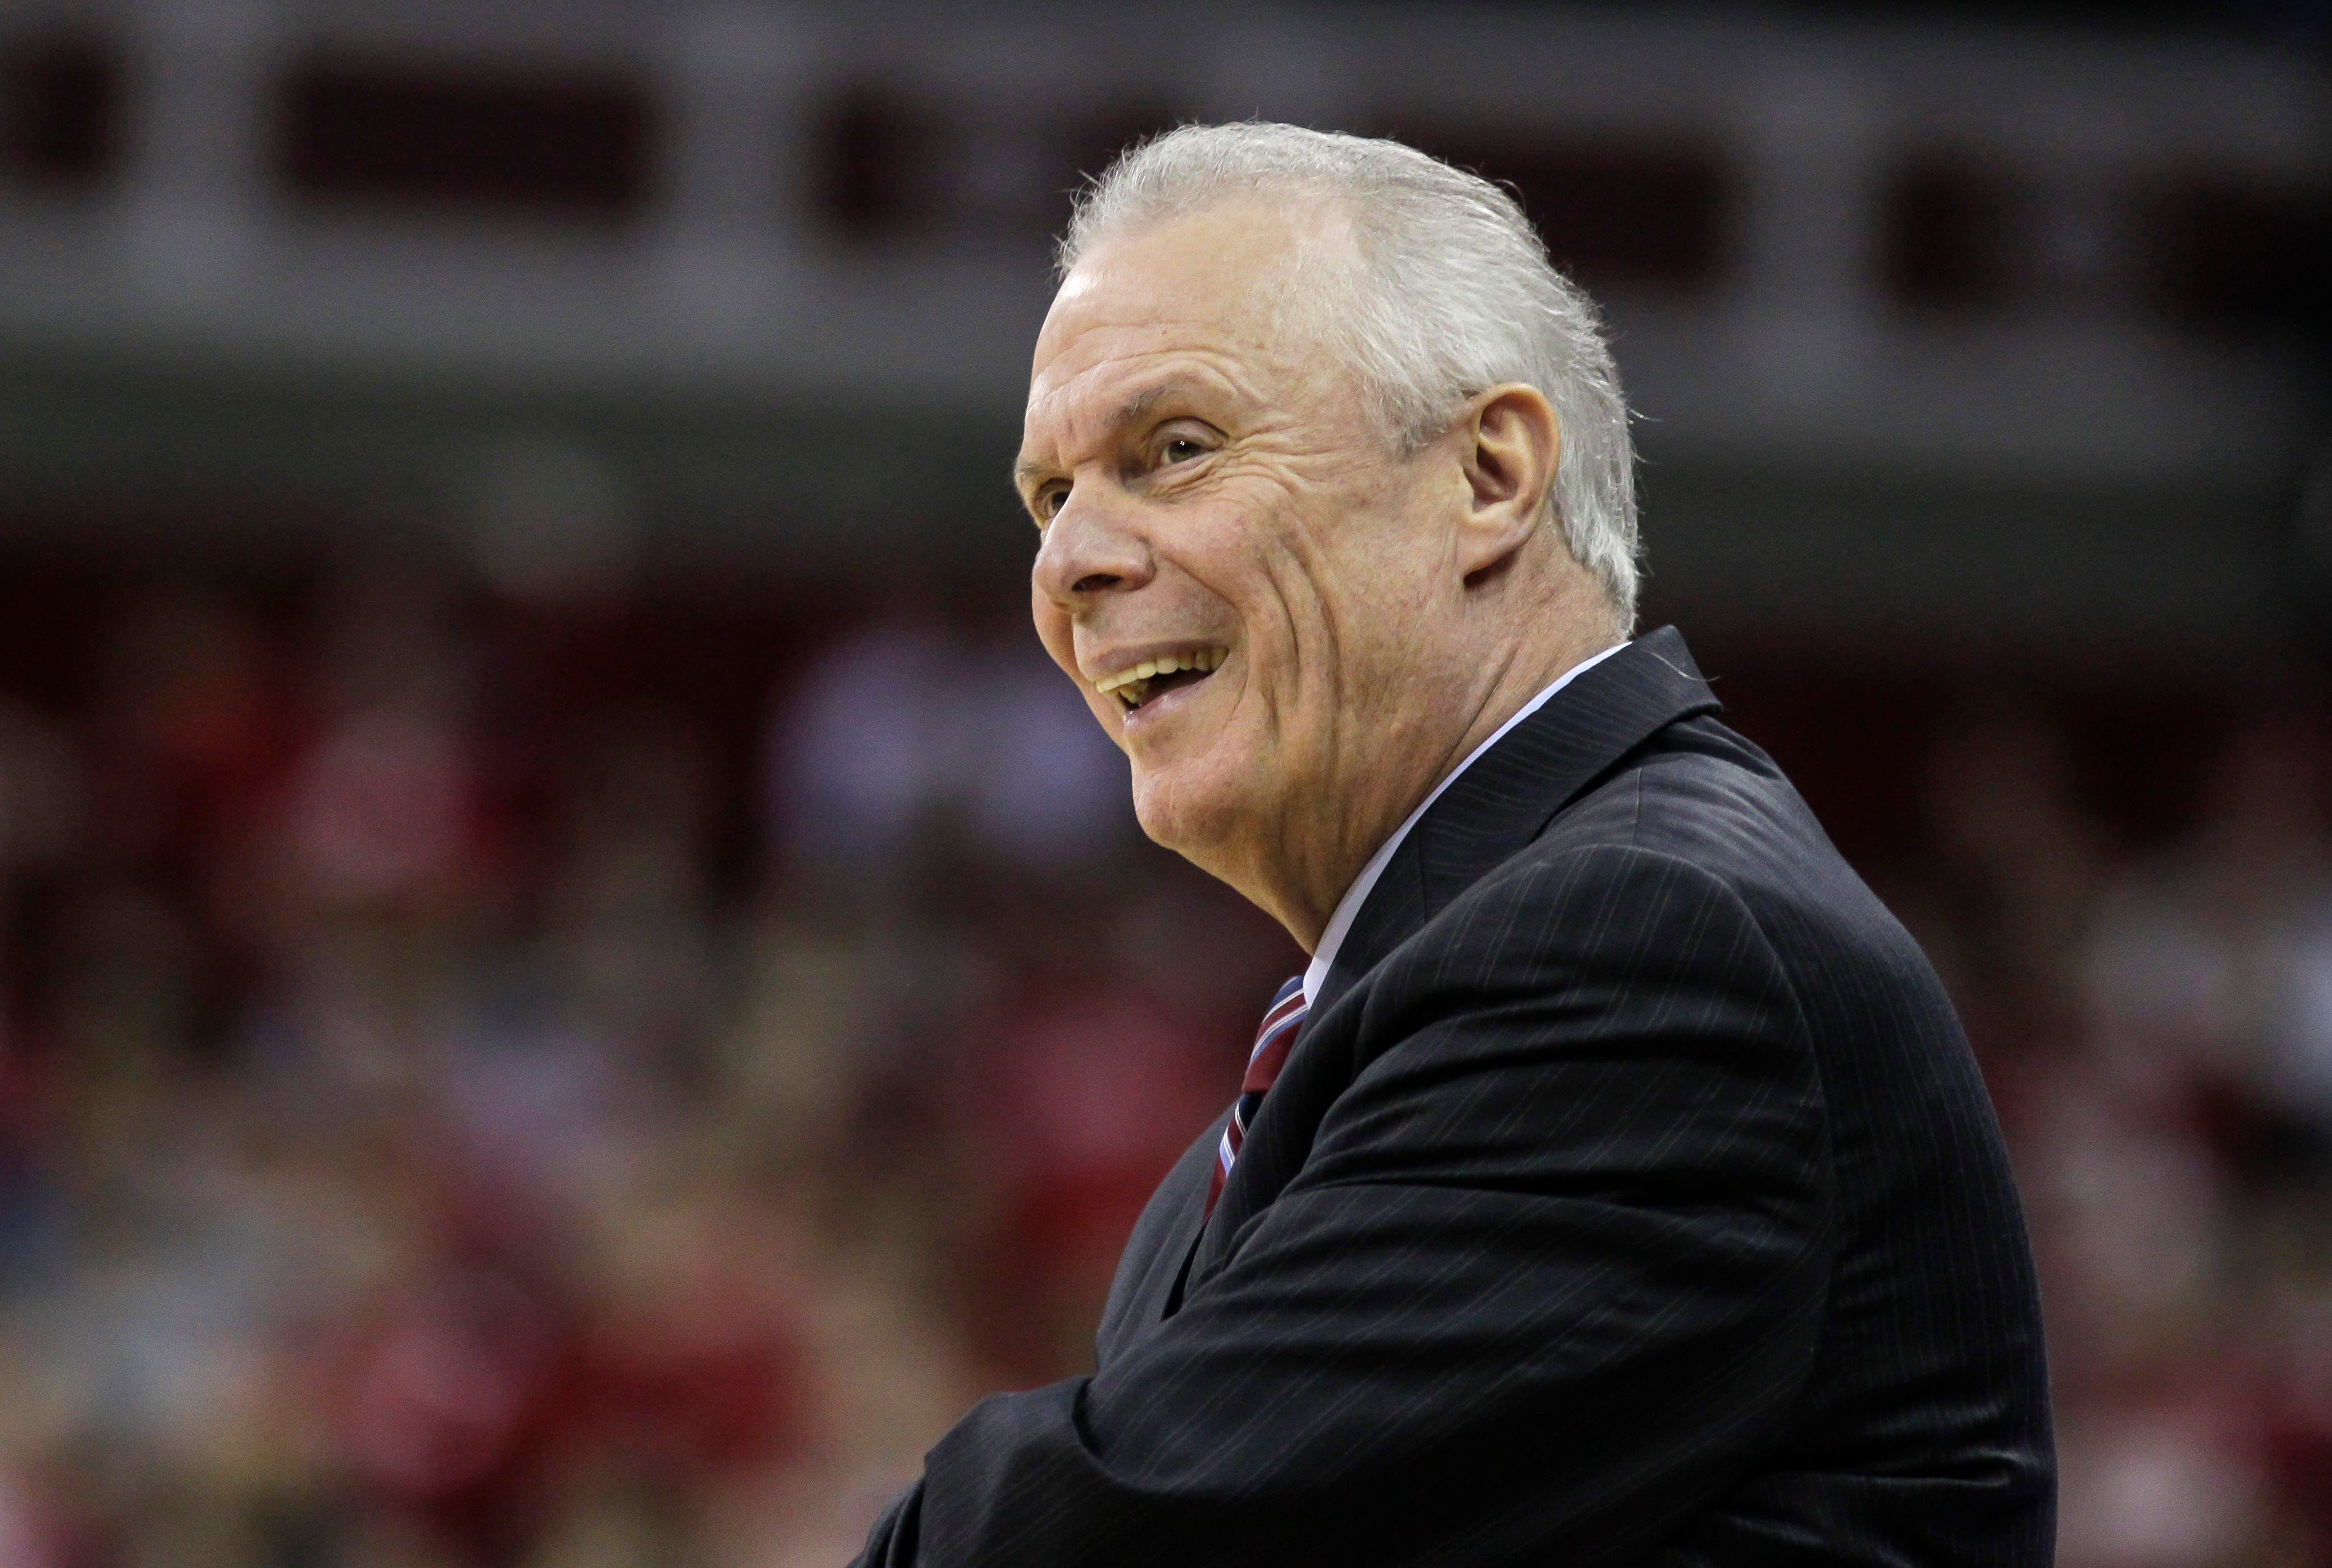 bo ryan is a finalist for induction into the naismith basketball hall of fame